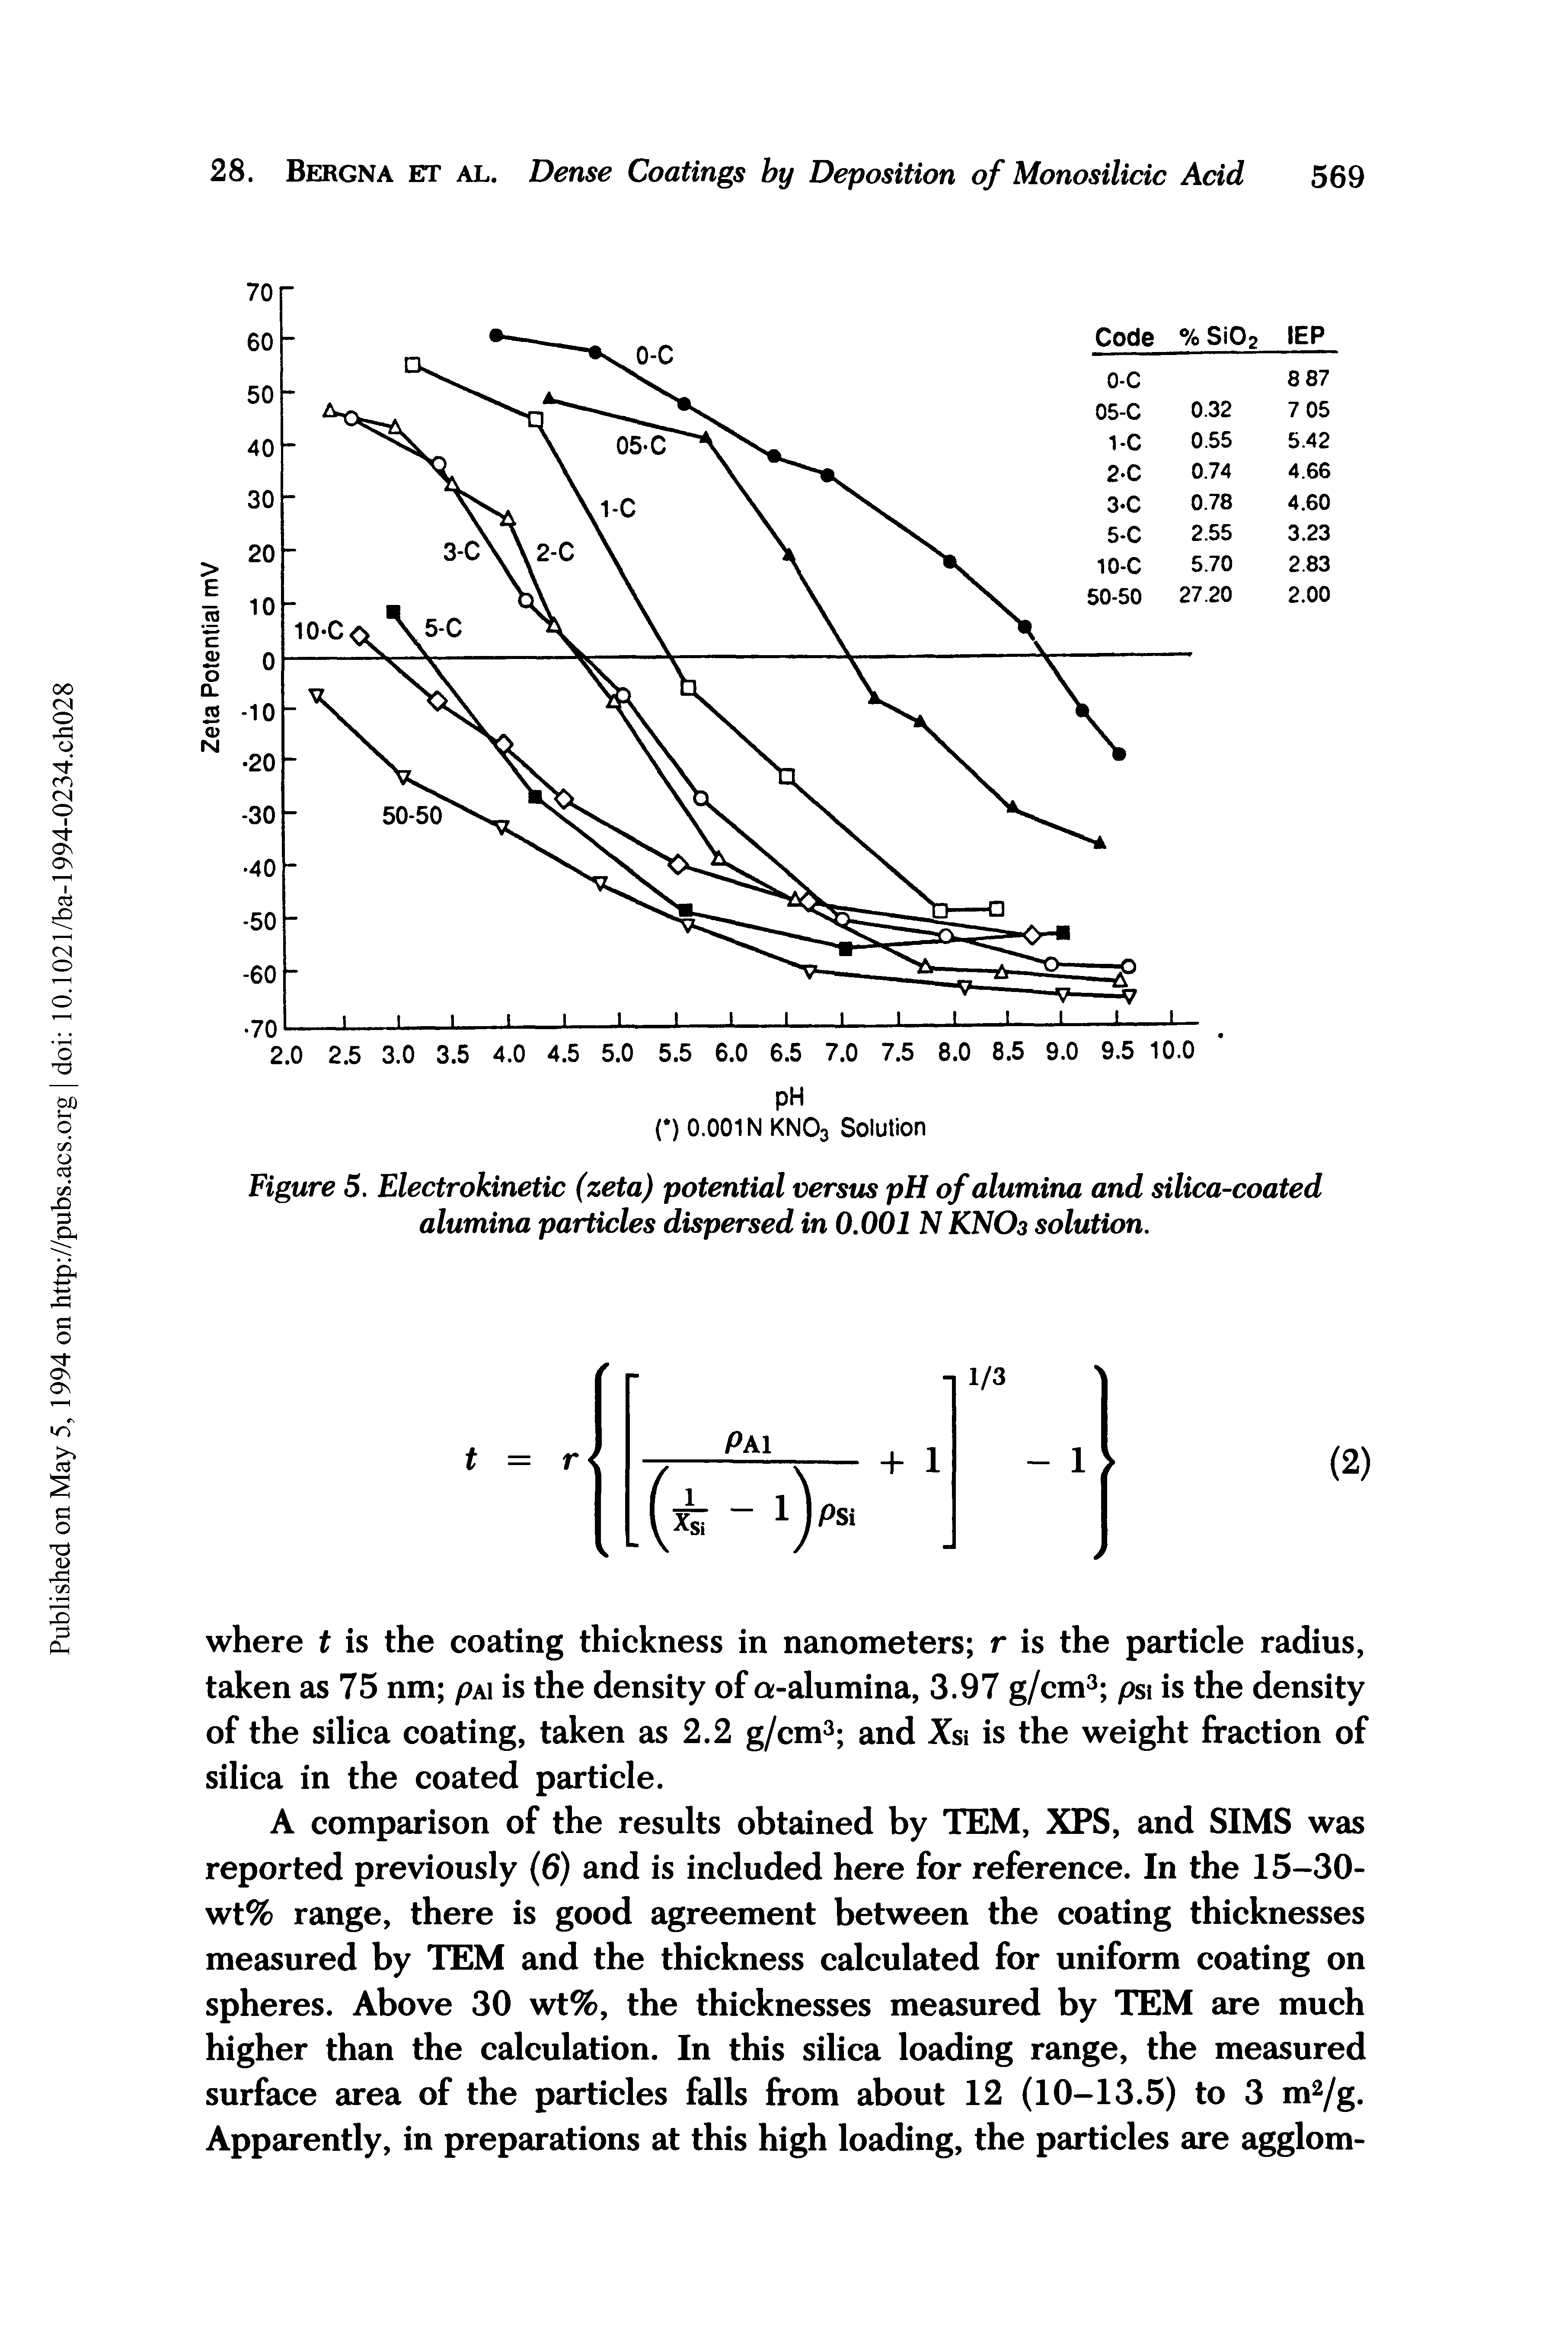 Figure 5. Electrokinetic (zeta) potential versus pH of alumina and silica-coated alumina particles dispersed in 0.001 N KNO3 solution.